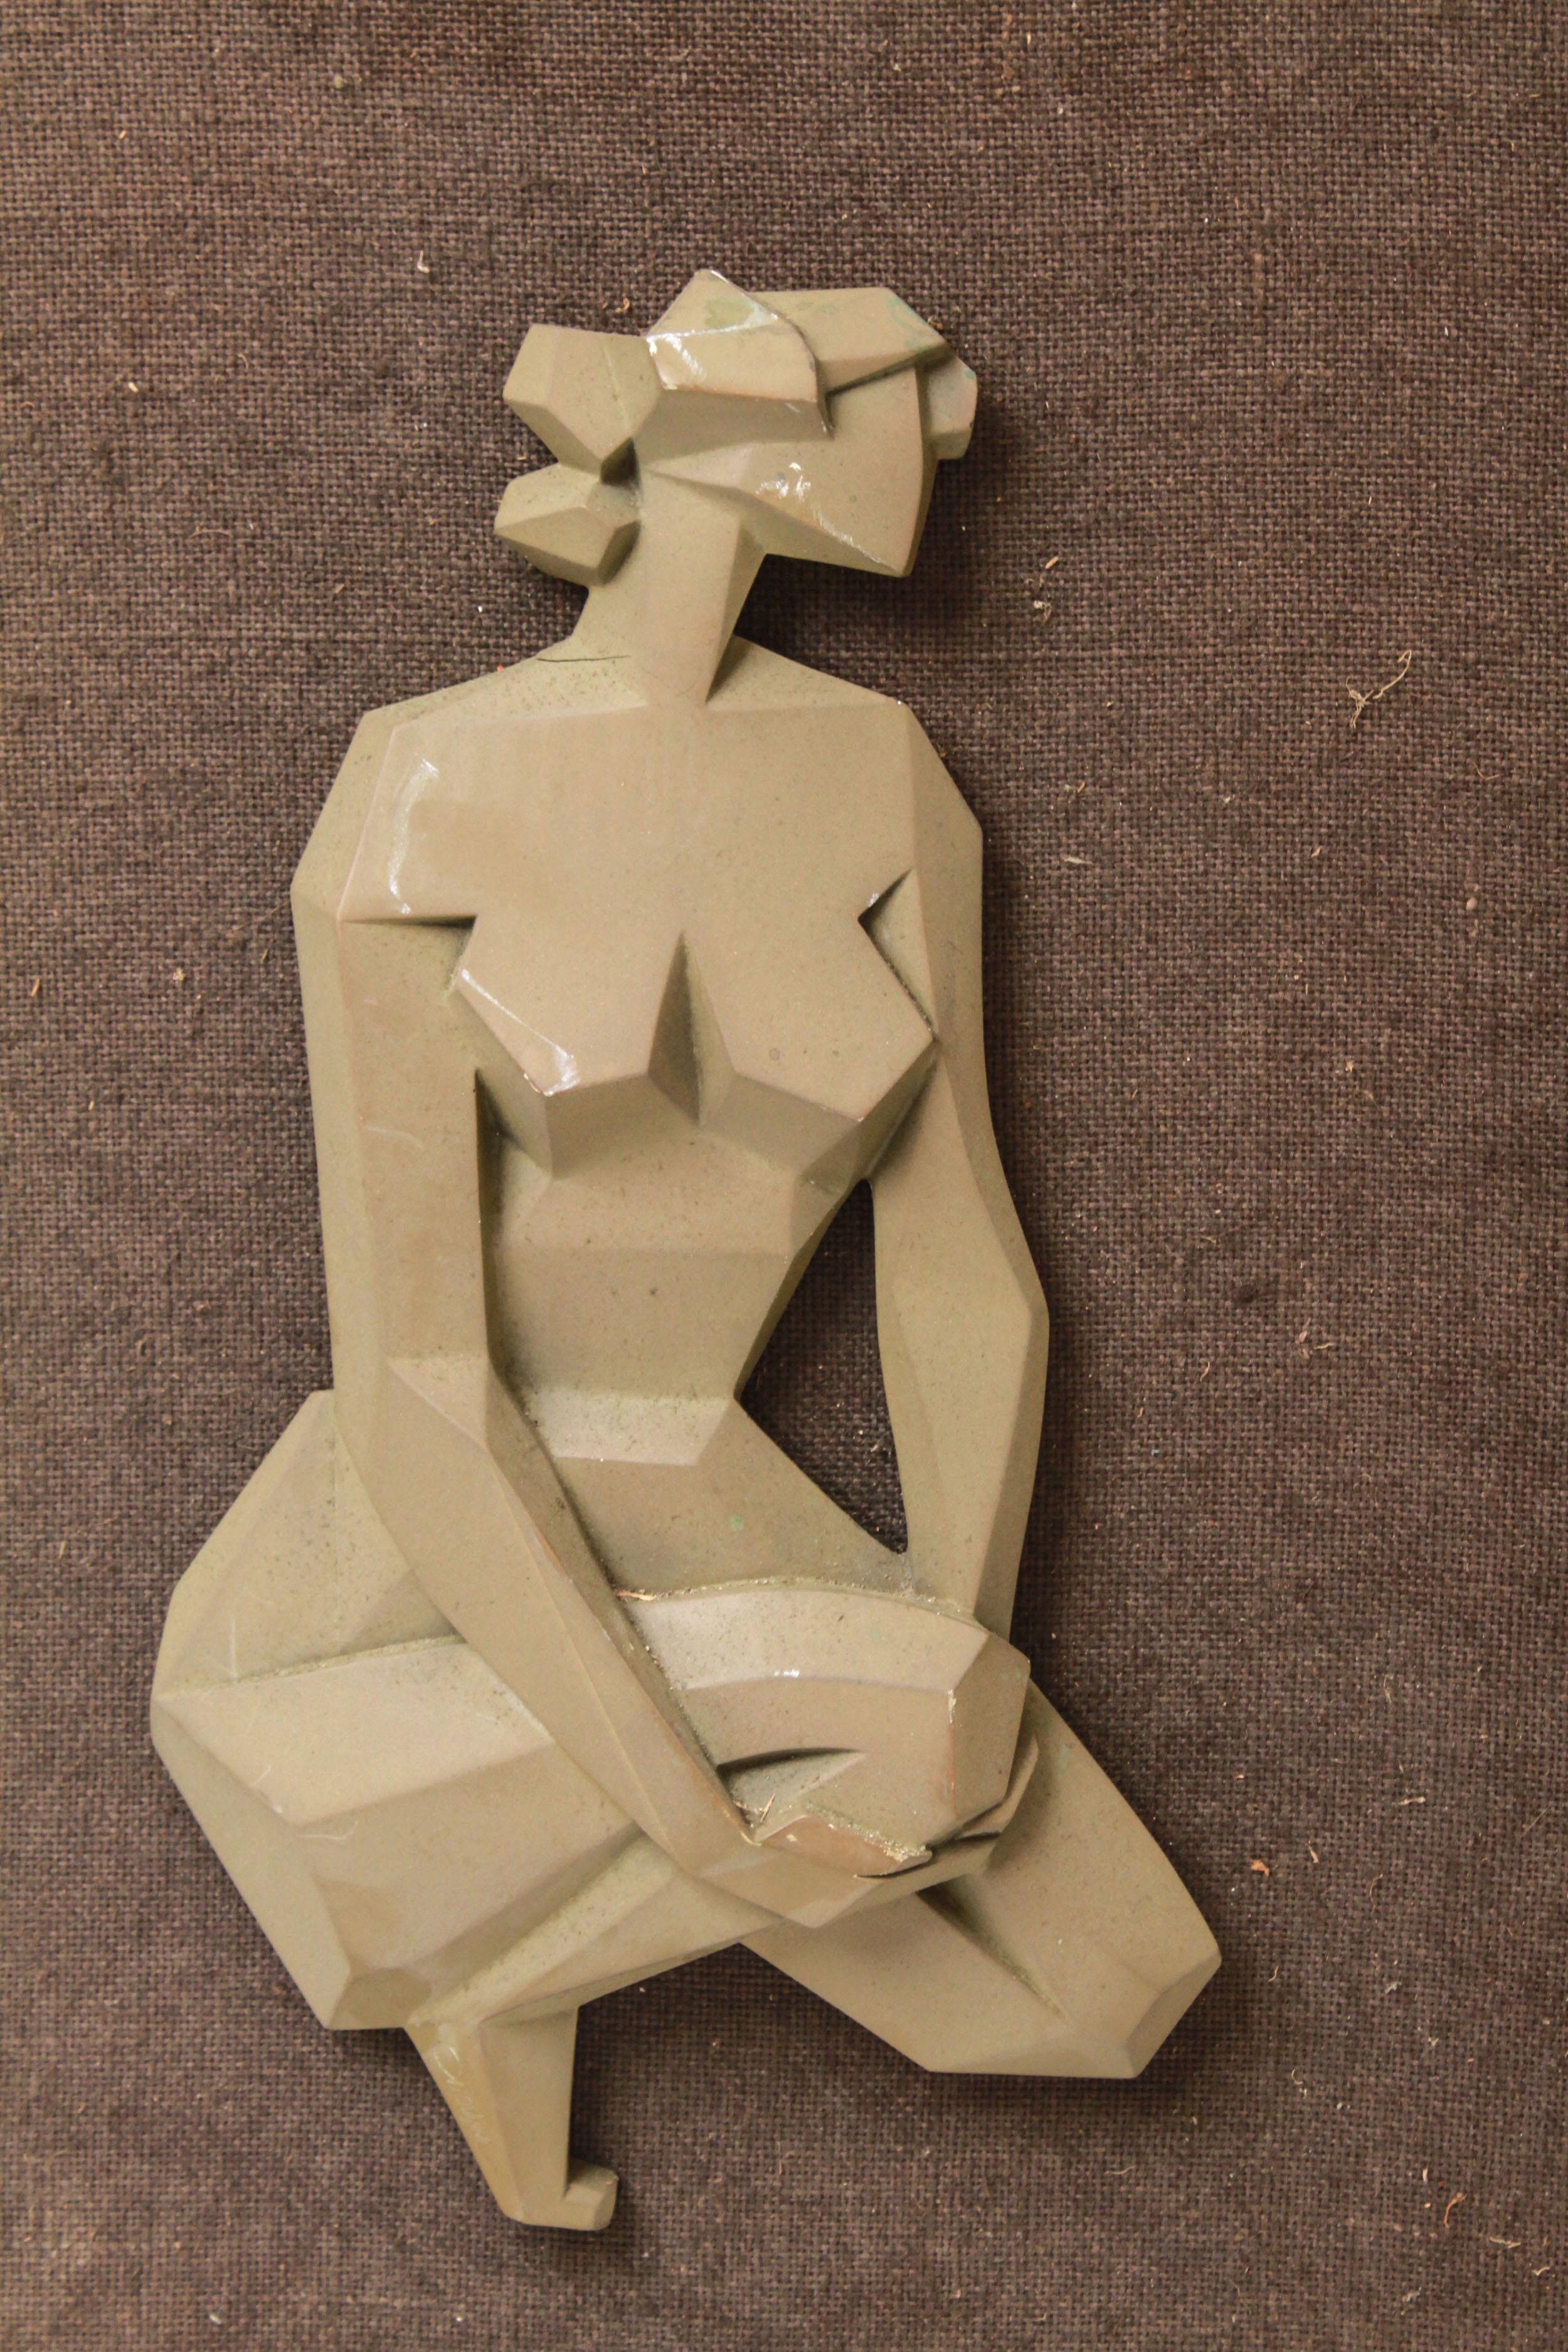 Mid-Century Modern framed metal wall sculpture of a female nude figure in bas-relief, created by Giovanni Schoeman (South African, 1940-1980). The piece is signed 